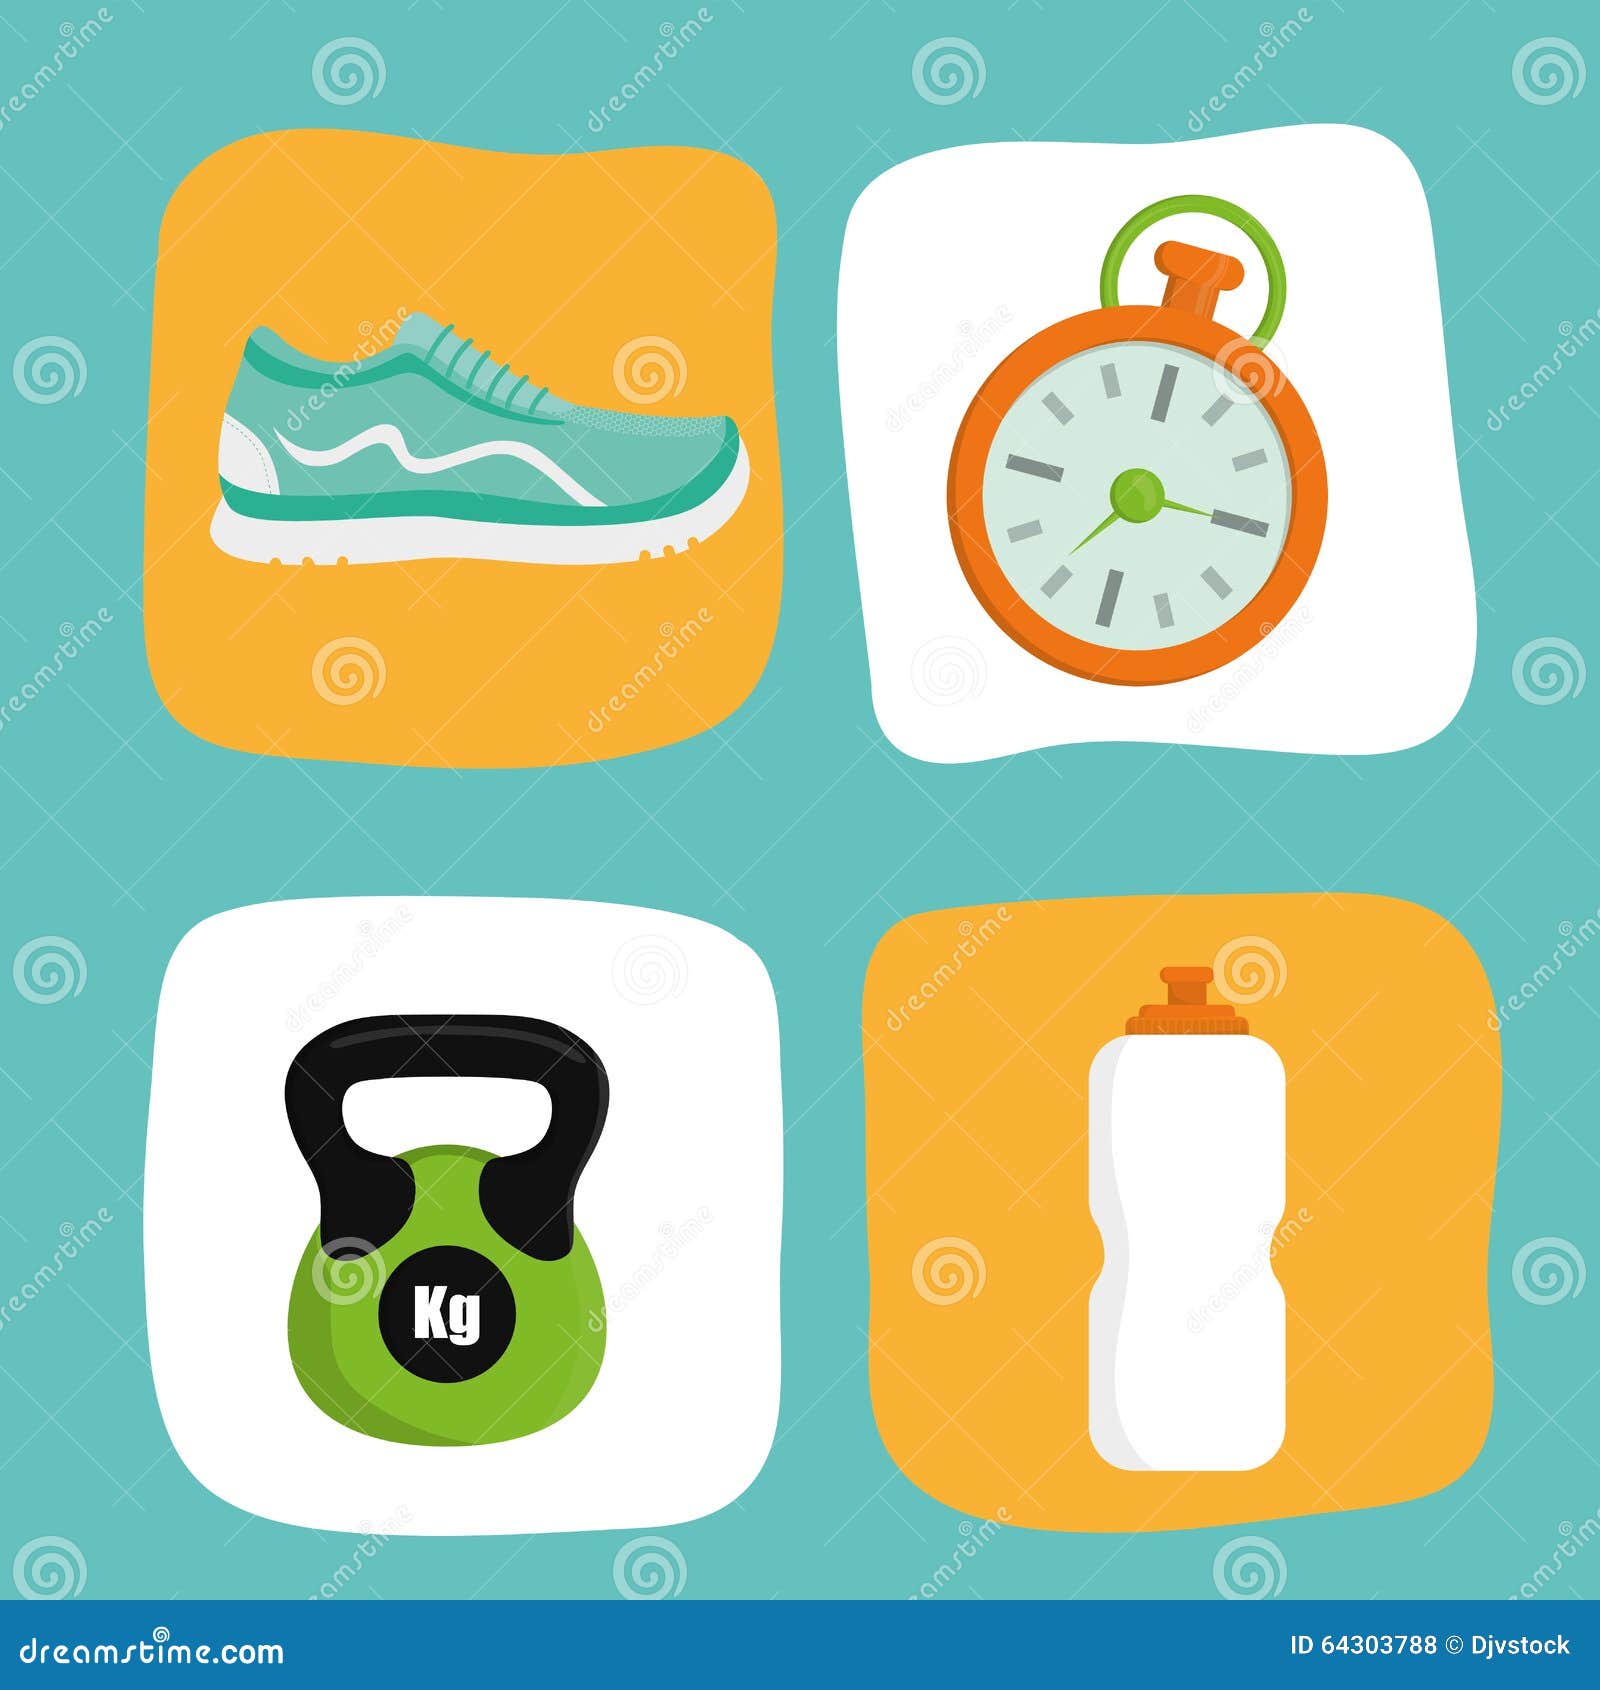 Fitness Icon Vector Art, Icons, and Graphics for Free Download